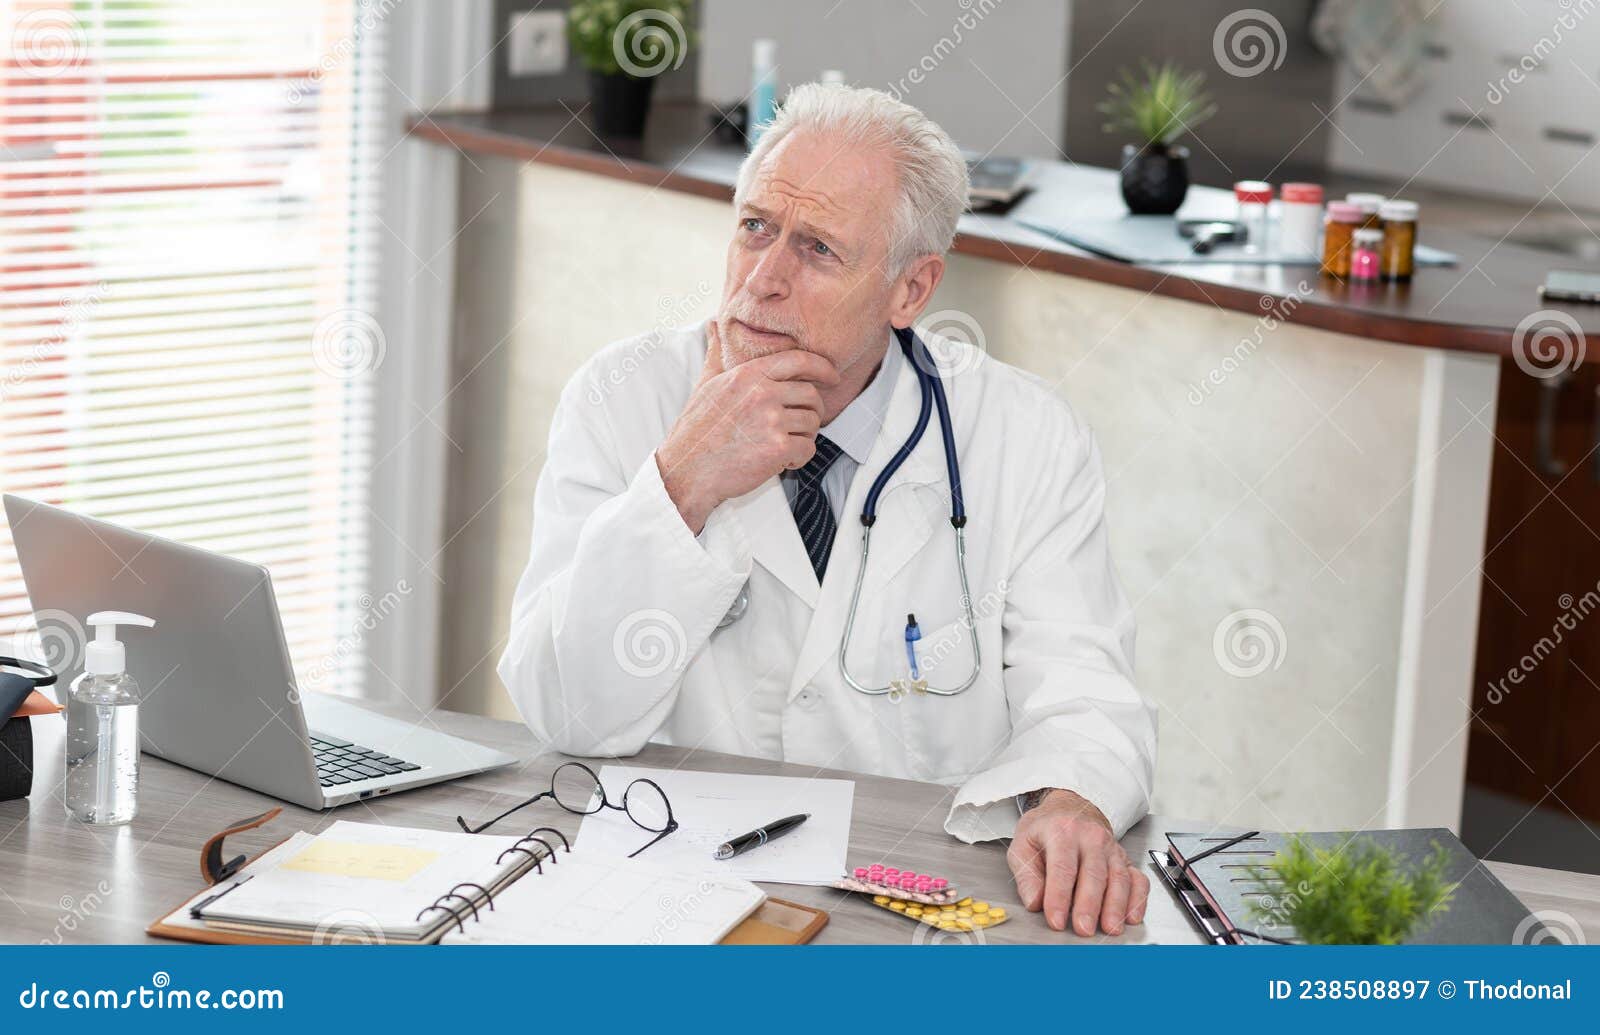 Portrait of Thoughtful Doctor Stock Image - Image of physician ...